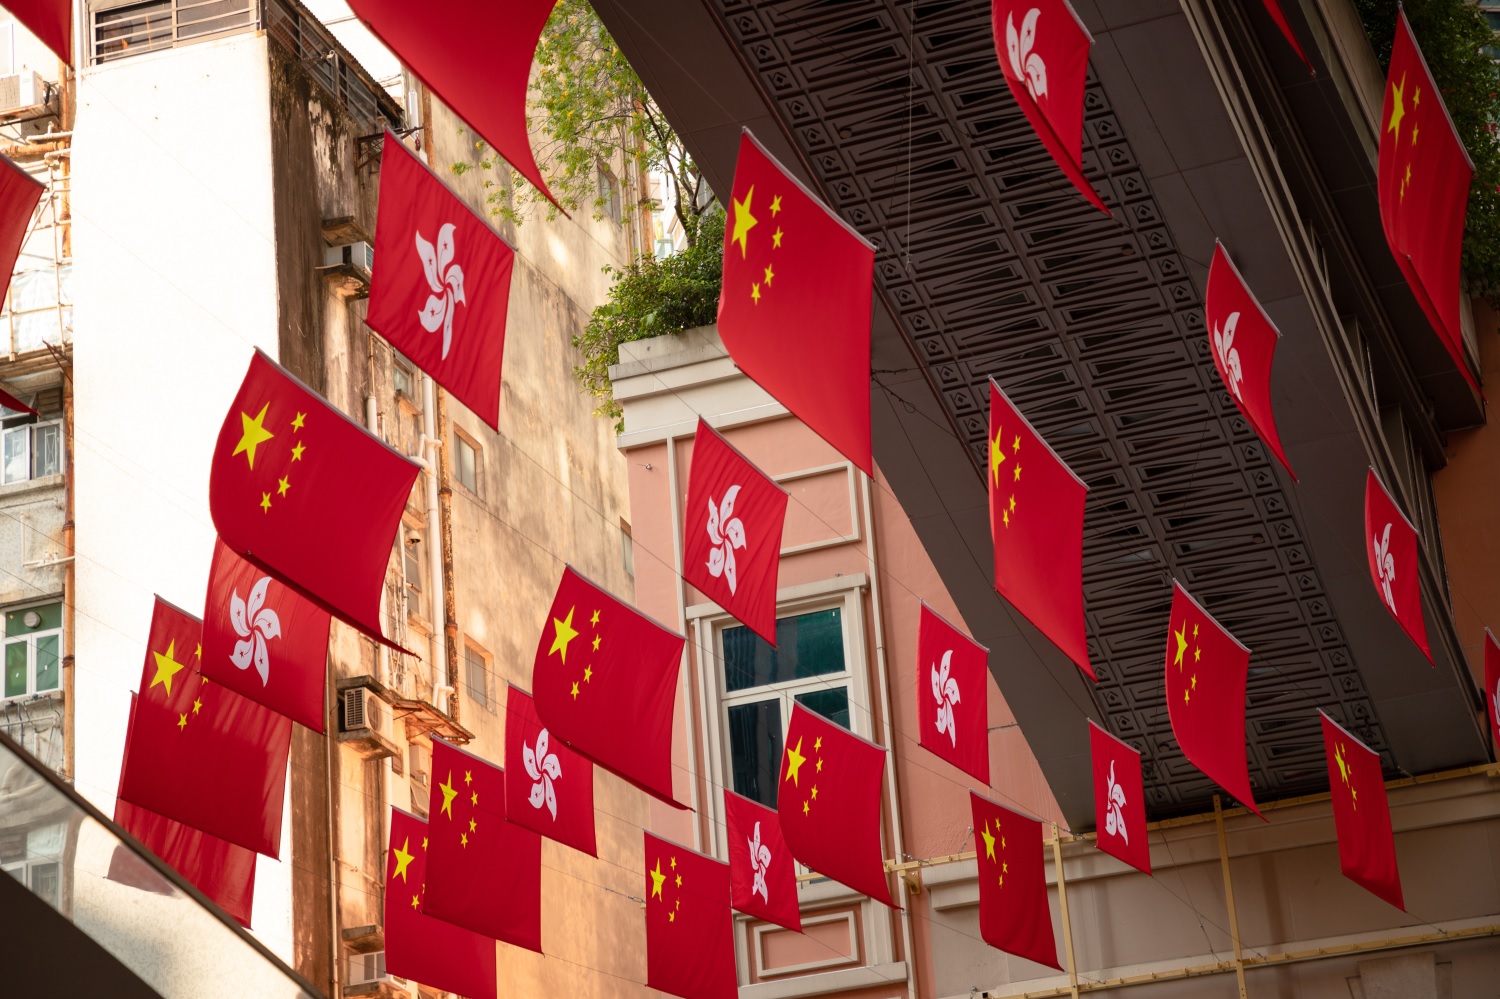 Flags of the PeopleÔÇÖs Republic and Hong Kong hang in a public street.